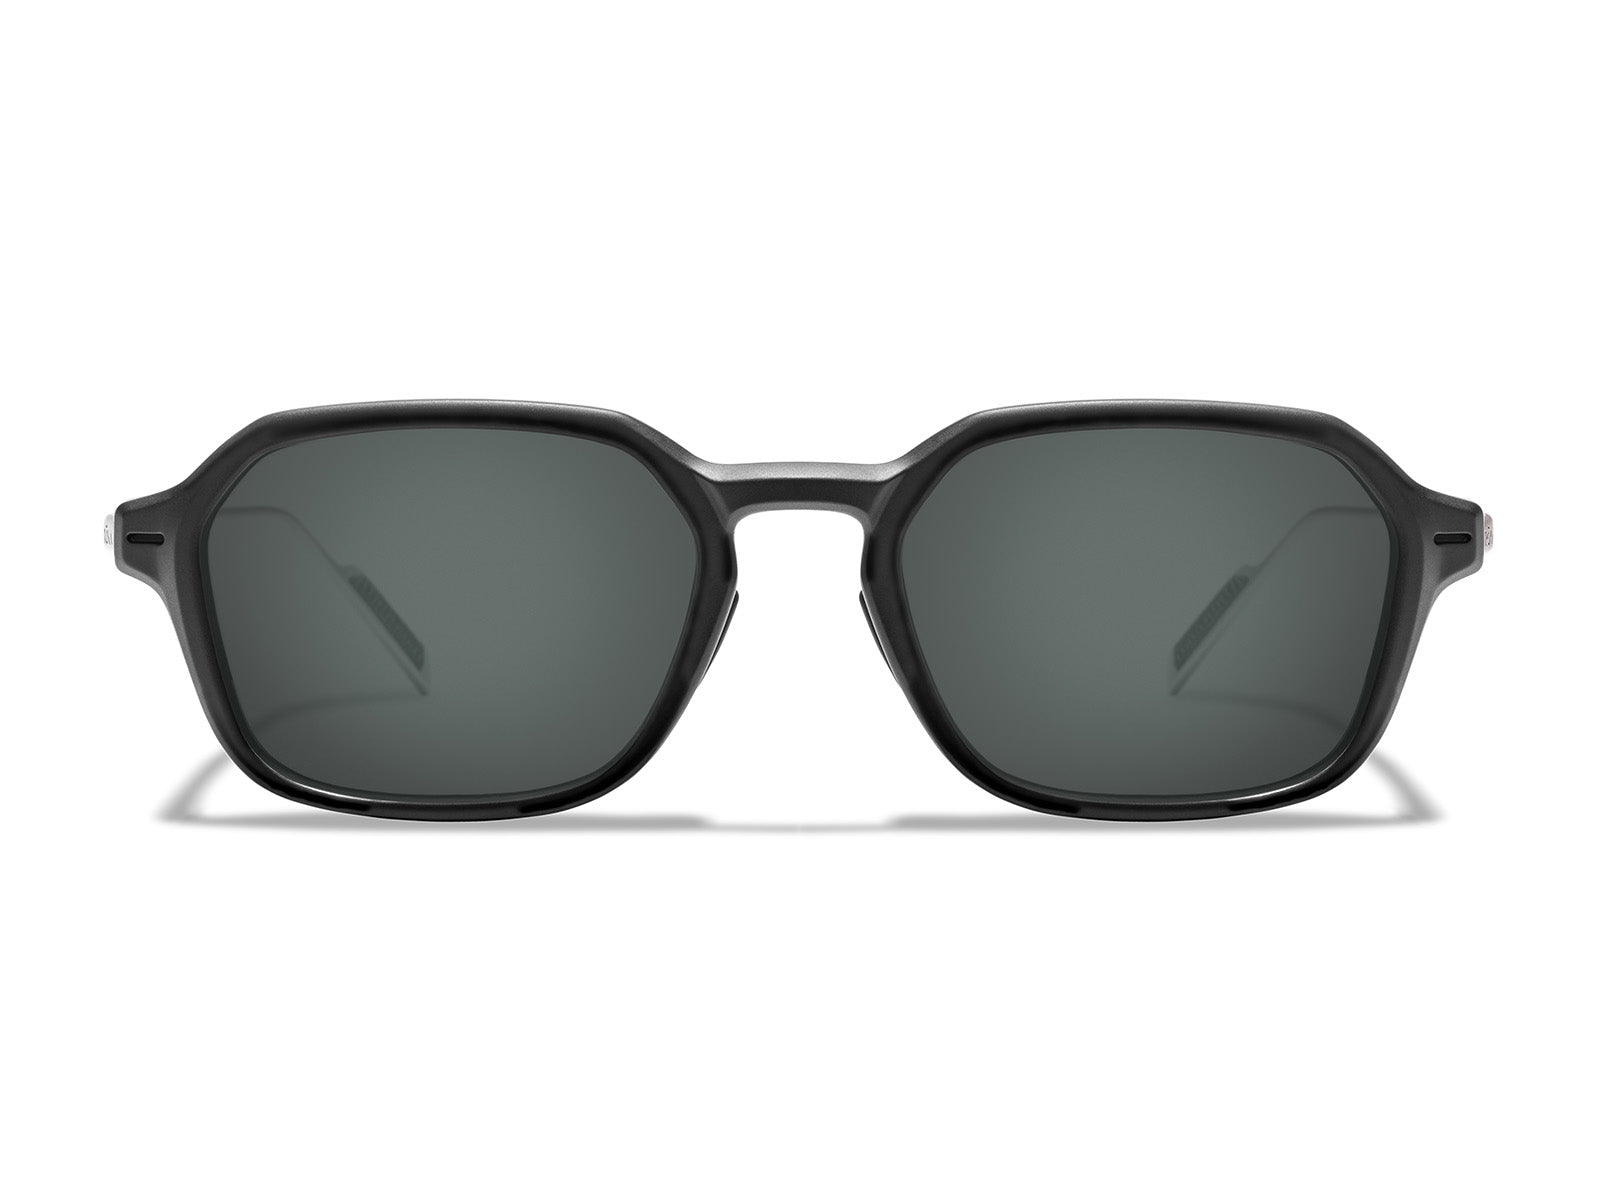 Lewis Sunglasses Outlet